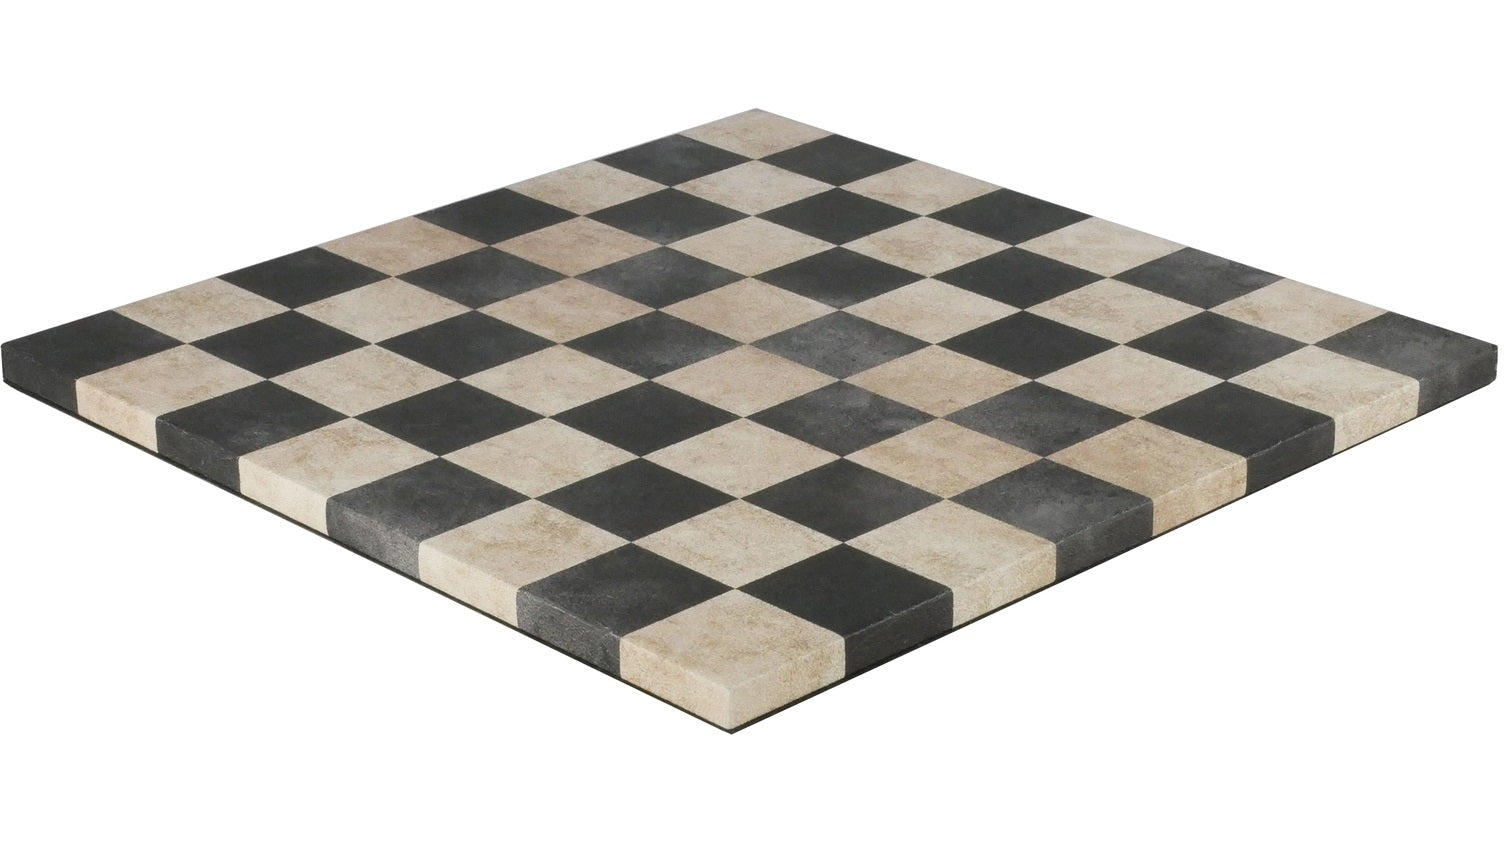 Faux Leather Chess Board